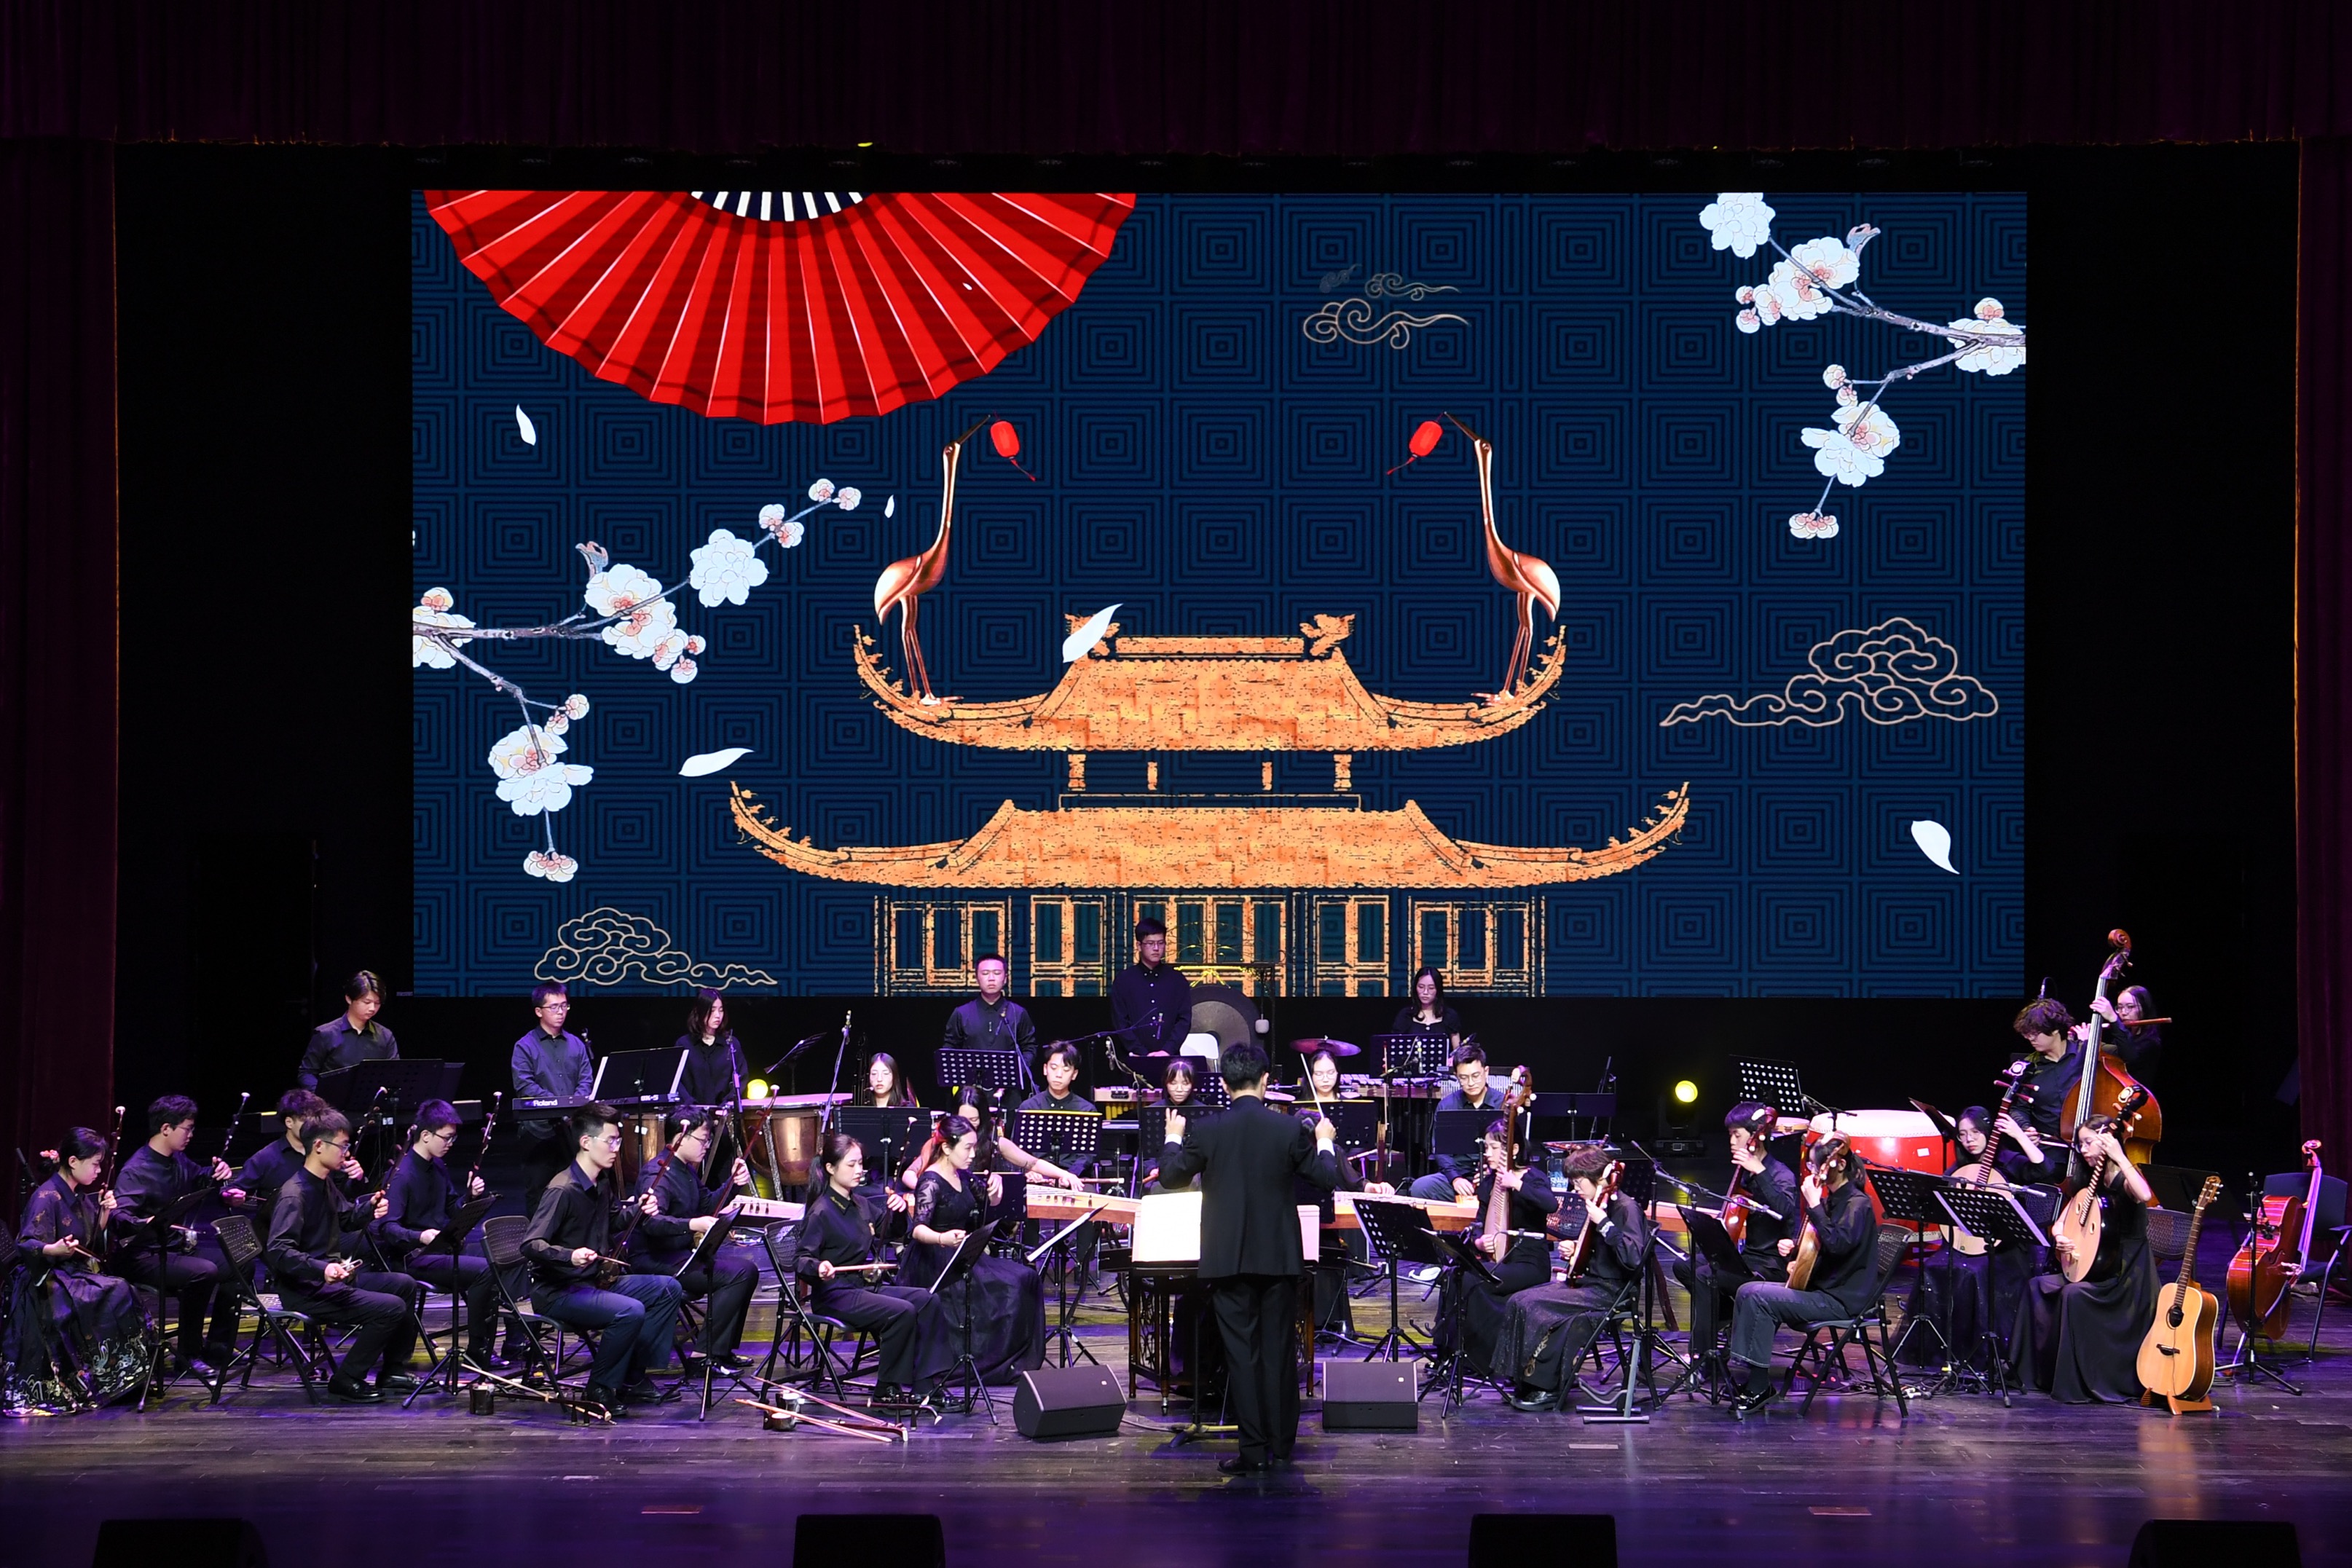 SUSTech embraces traditional Chinese music